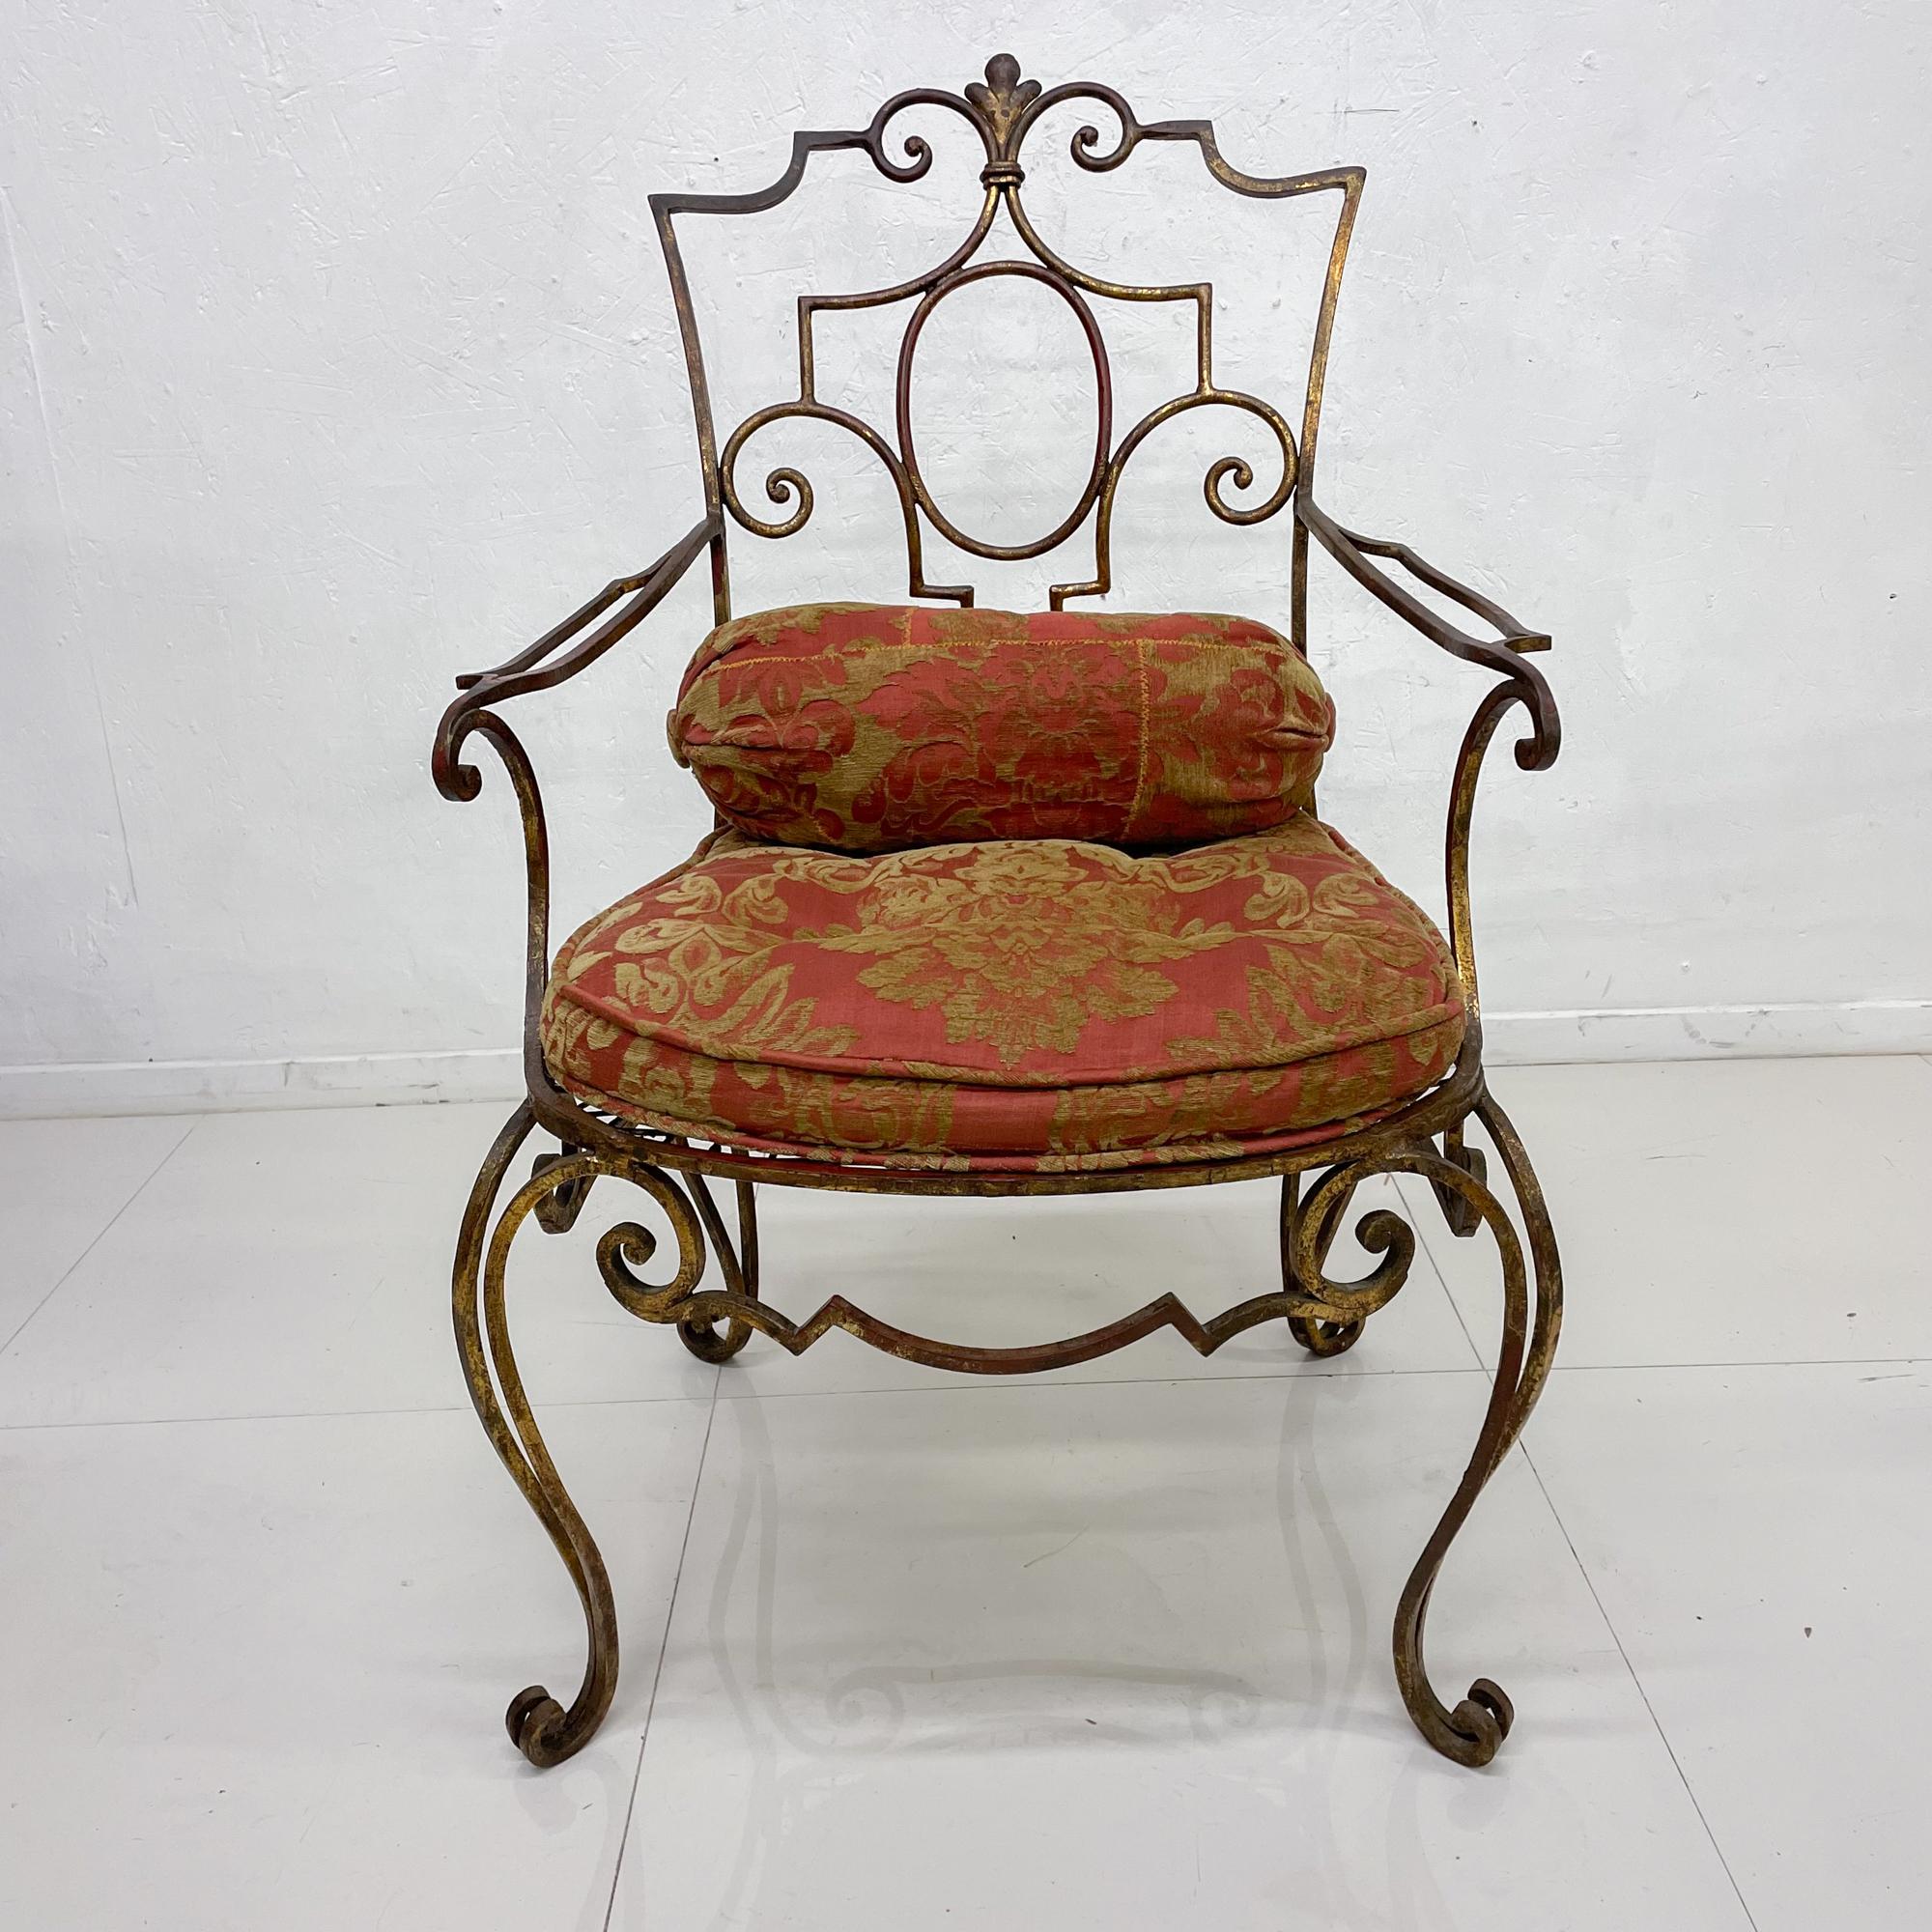 Hand forged accent chair
Spectacular Regency chair Italian gilt over iron hand forged flair attribution style of Arturo Pani 1950s 
37.75 H x 23.5 W x 24 D and Seat H 19 inches with cushion, 16 without. Arm 24 inches
Original Italian